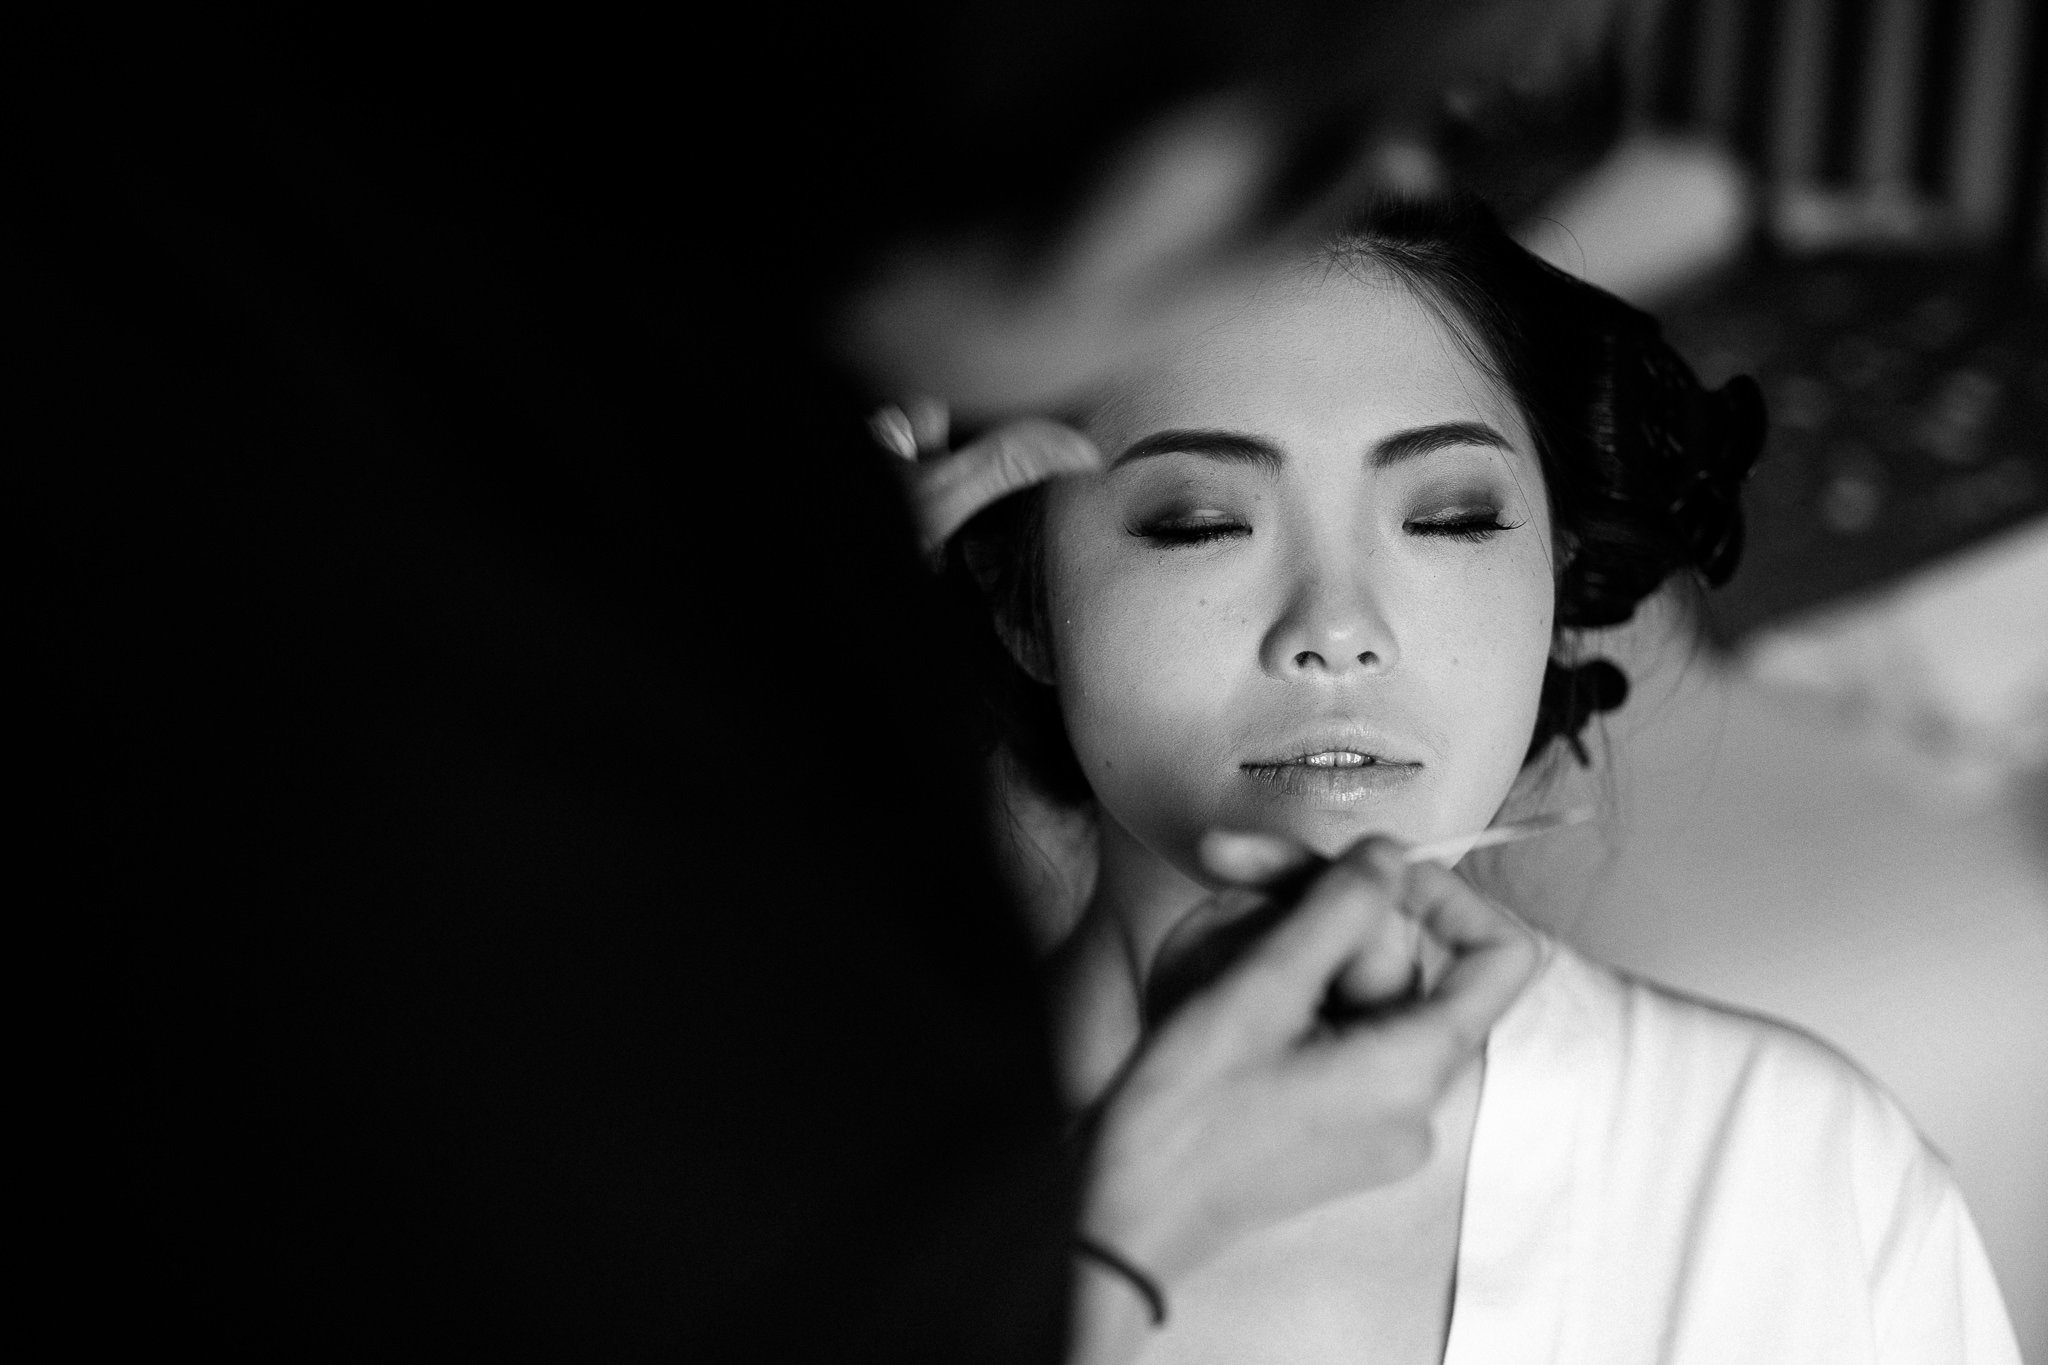  Bride having makeup applied on her wedding day 